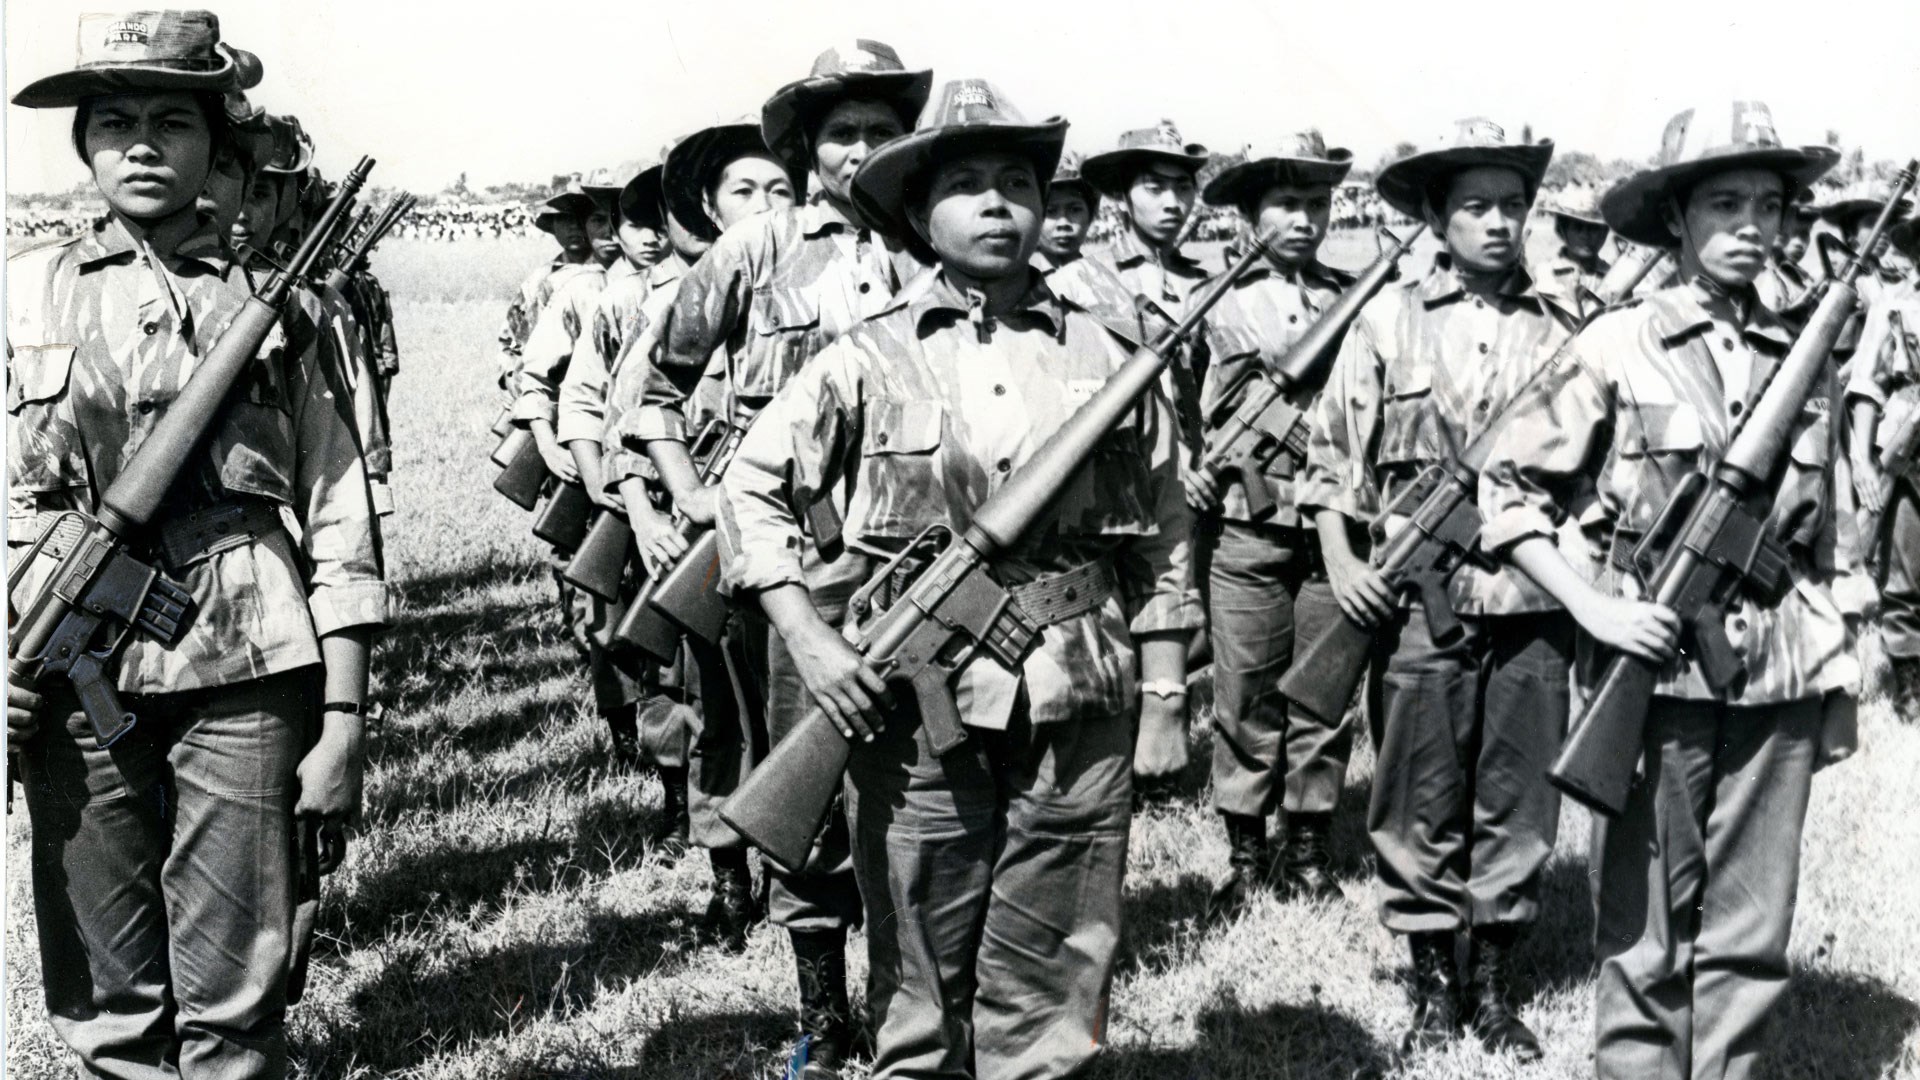 Indonesian female volunteer paratroopers armed with COLT/ArmaLite AR-15 Model 601 rifles - June 1965. Author’s collection